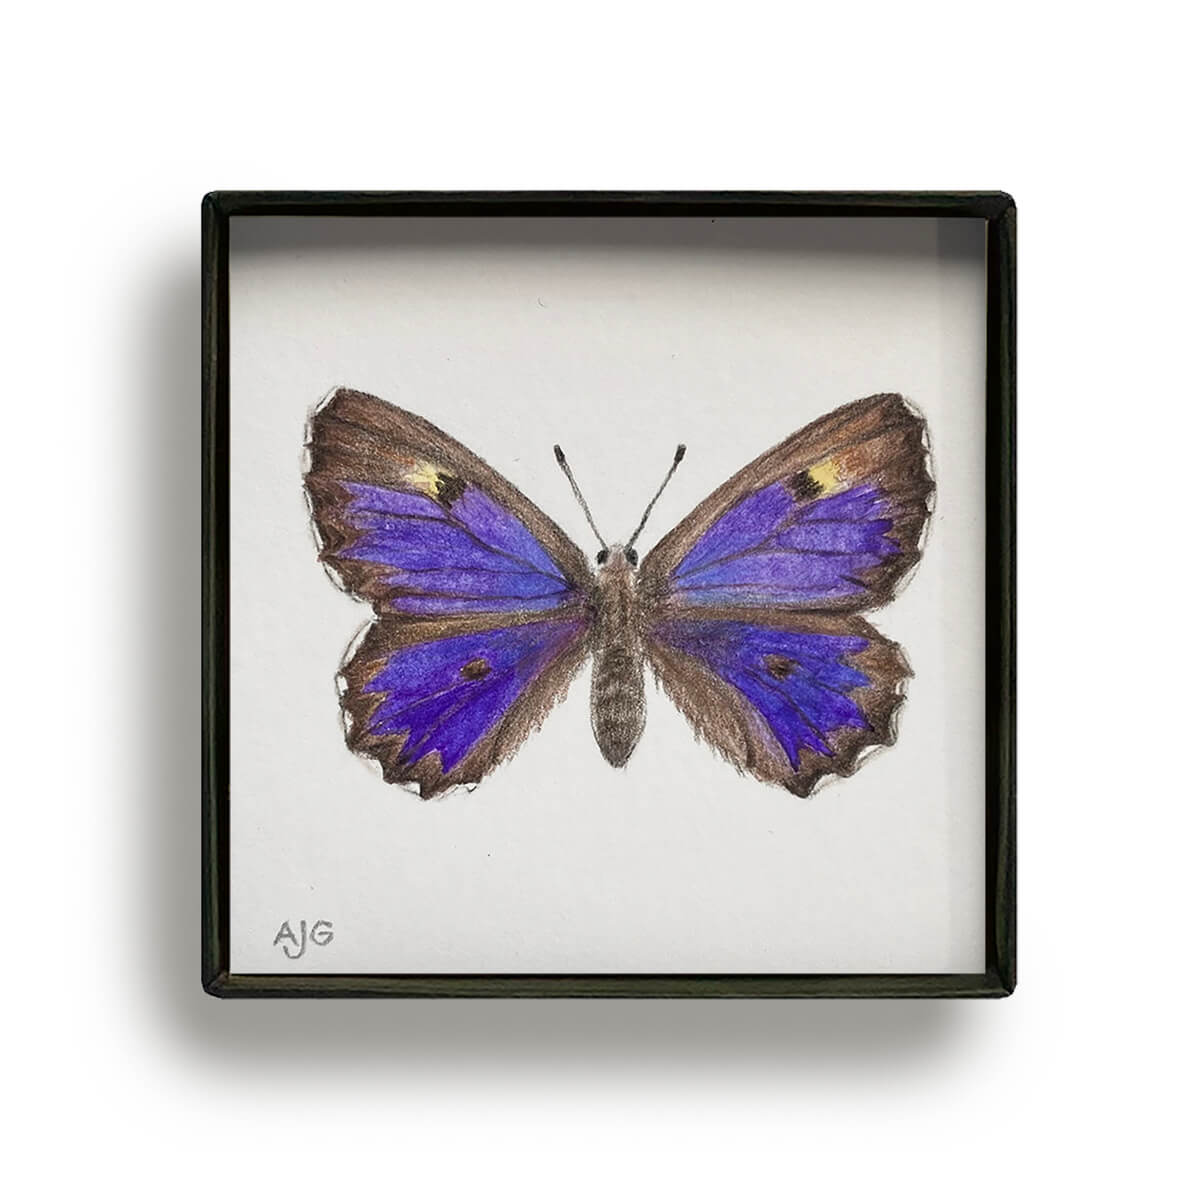 Bronze Azure Butterfly Painting Picture Box miniature insect painting by Amanda Gosse